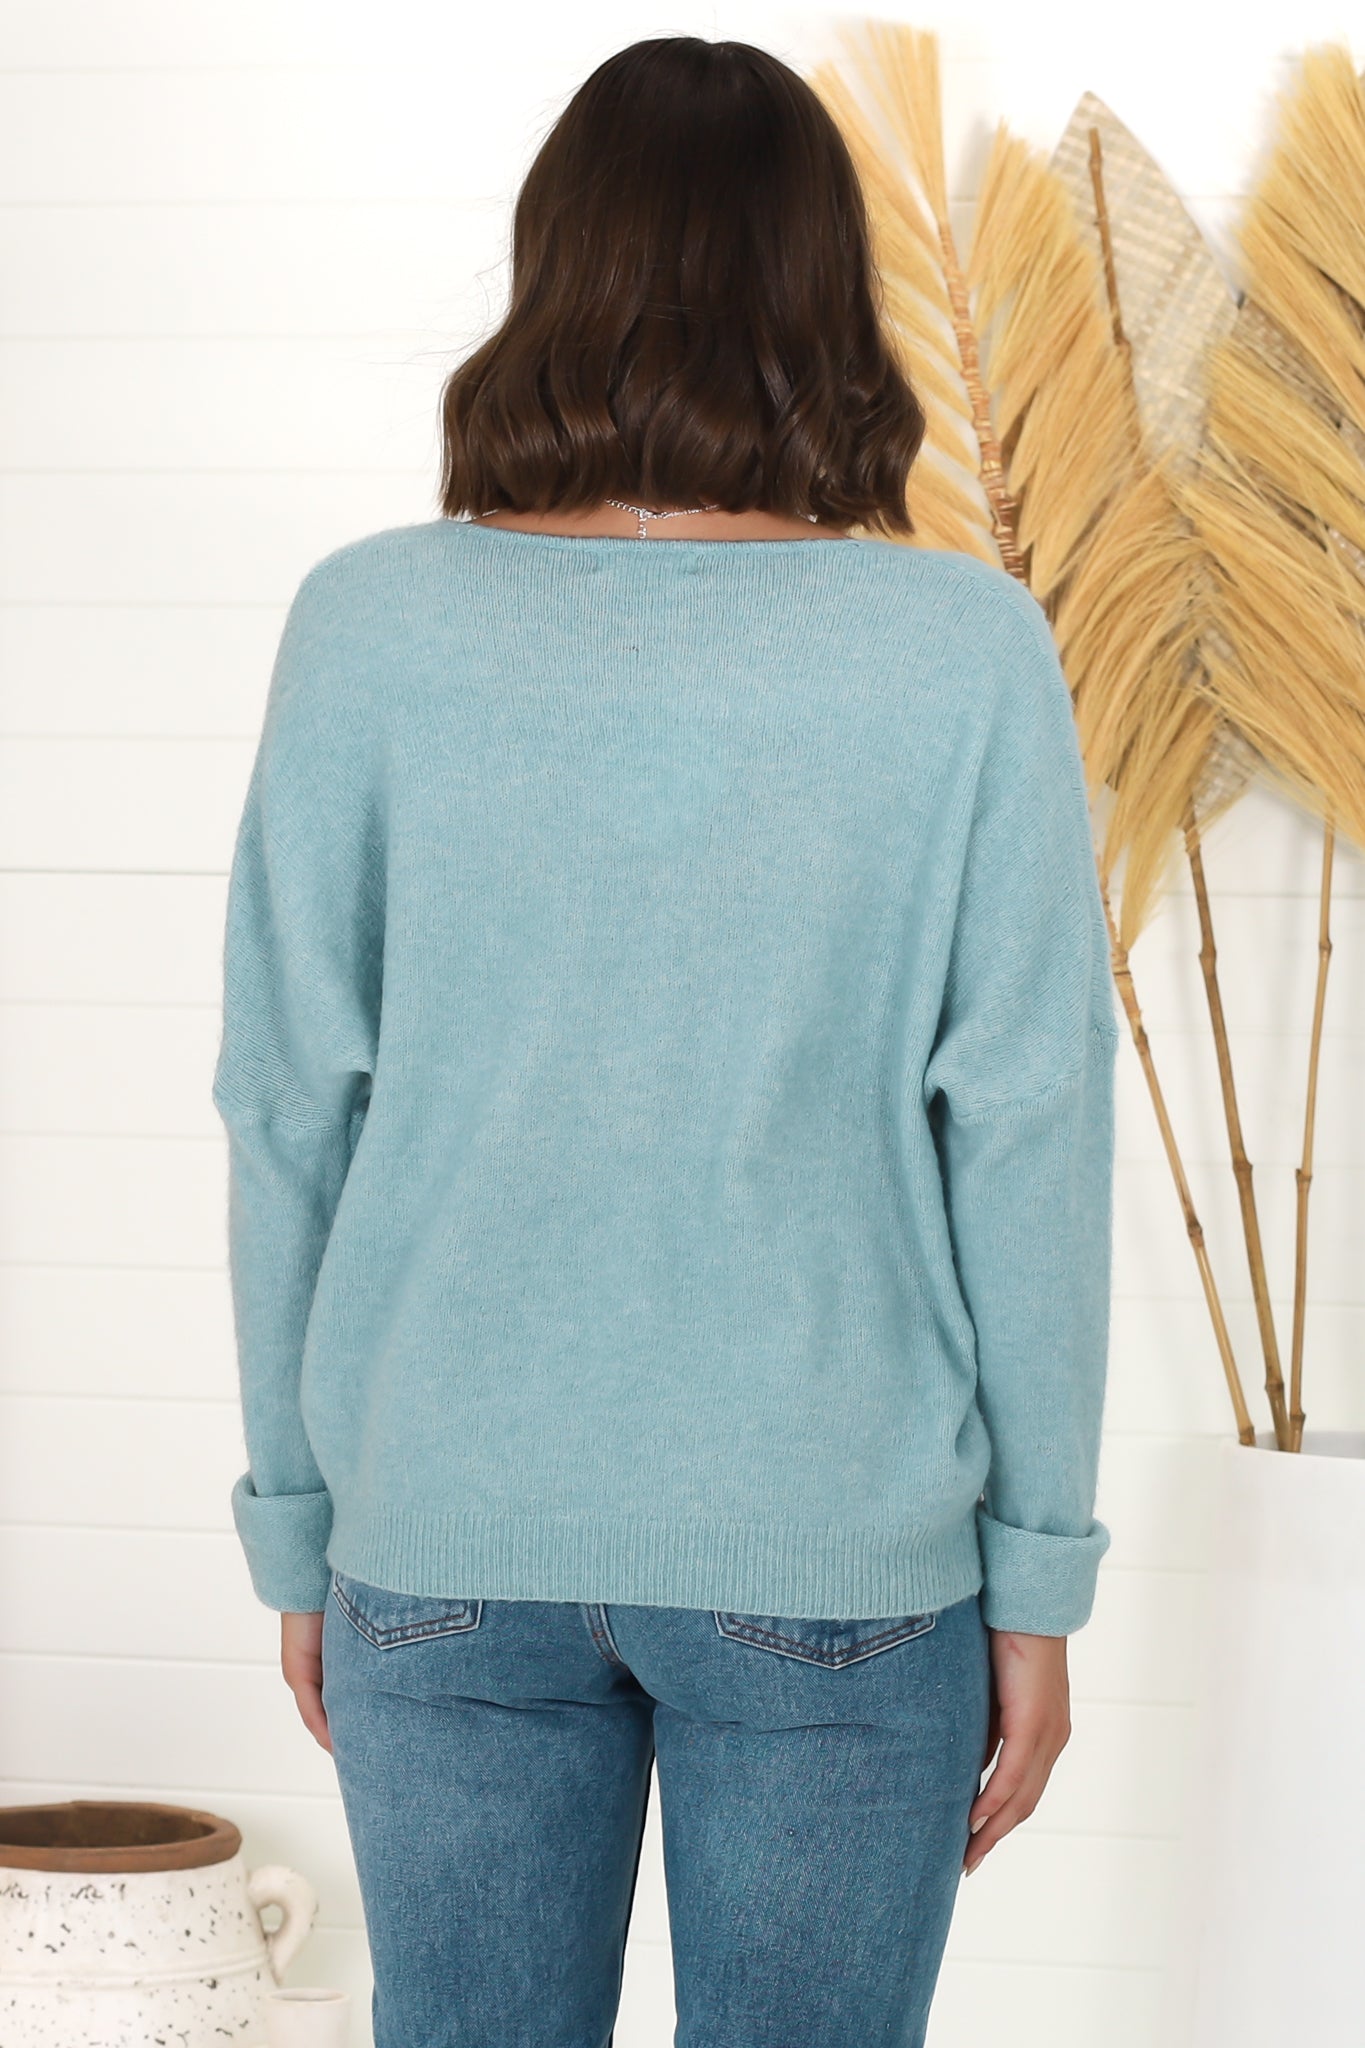 Carol Knit Top - Soft V Neck Batwing Sleeve Knit Top in Water Blue